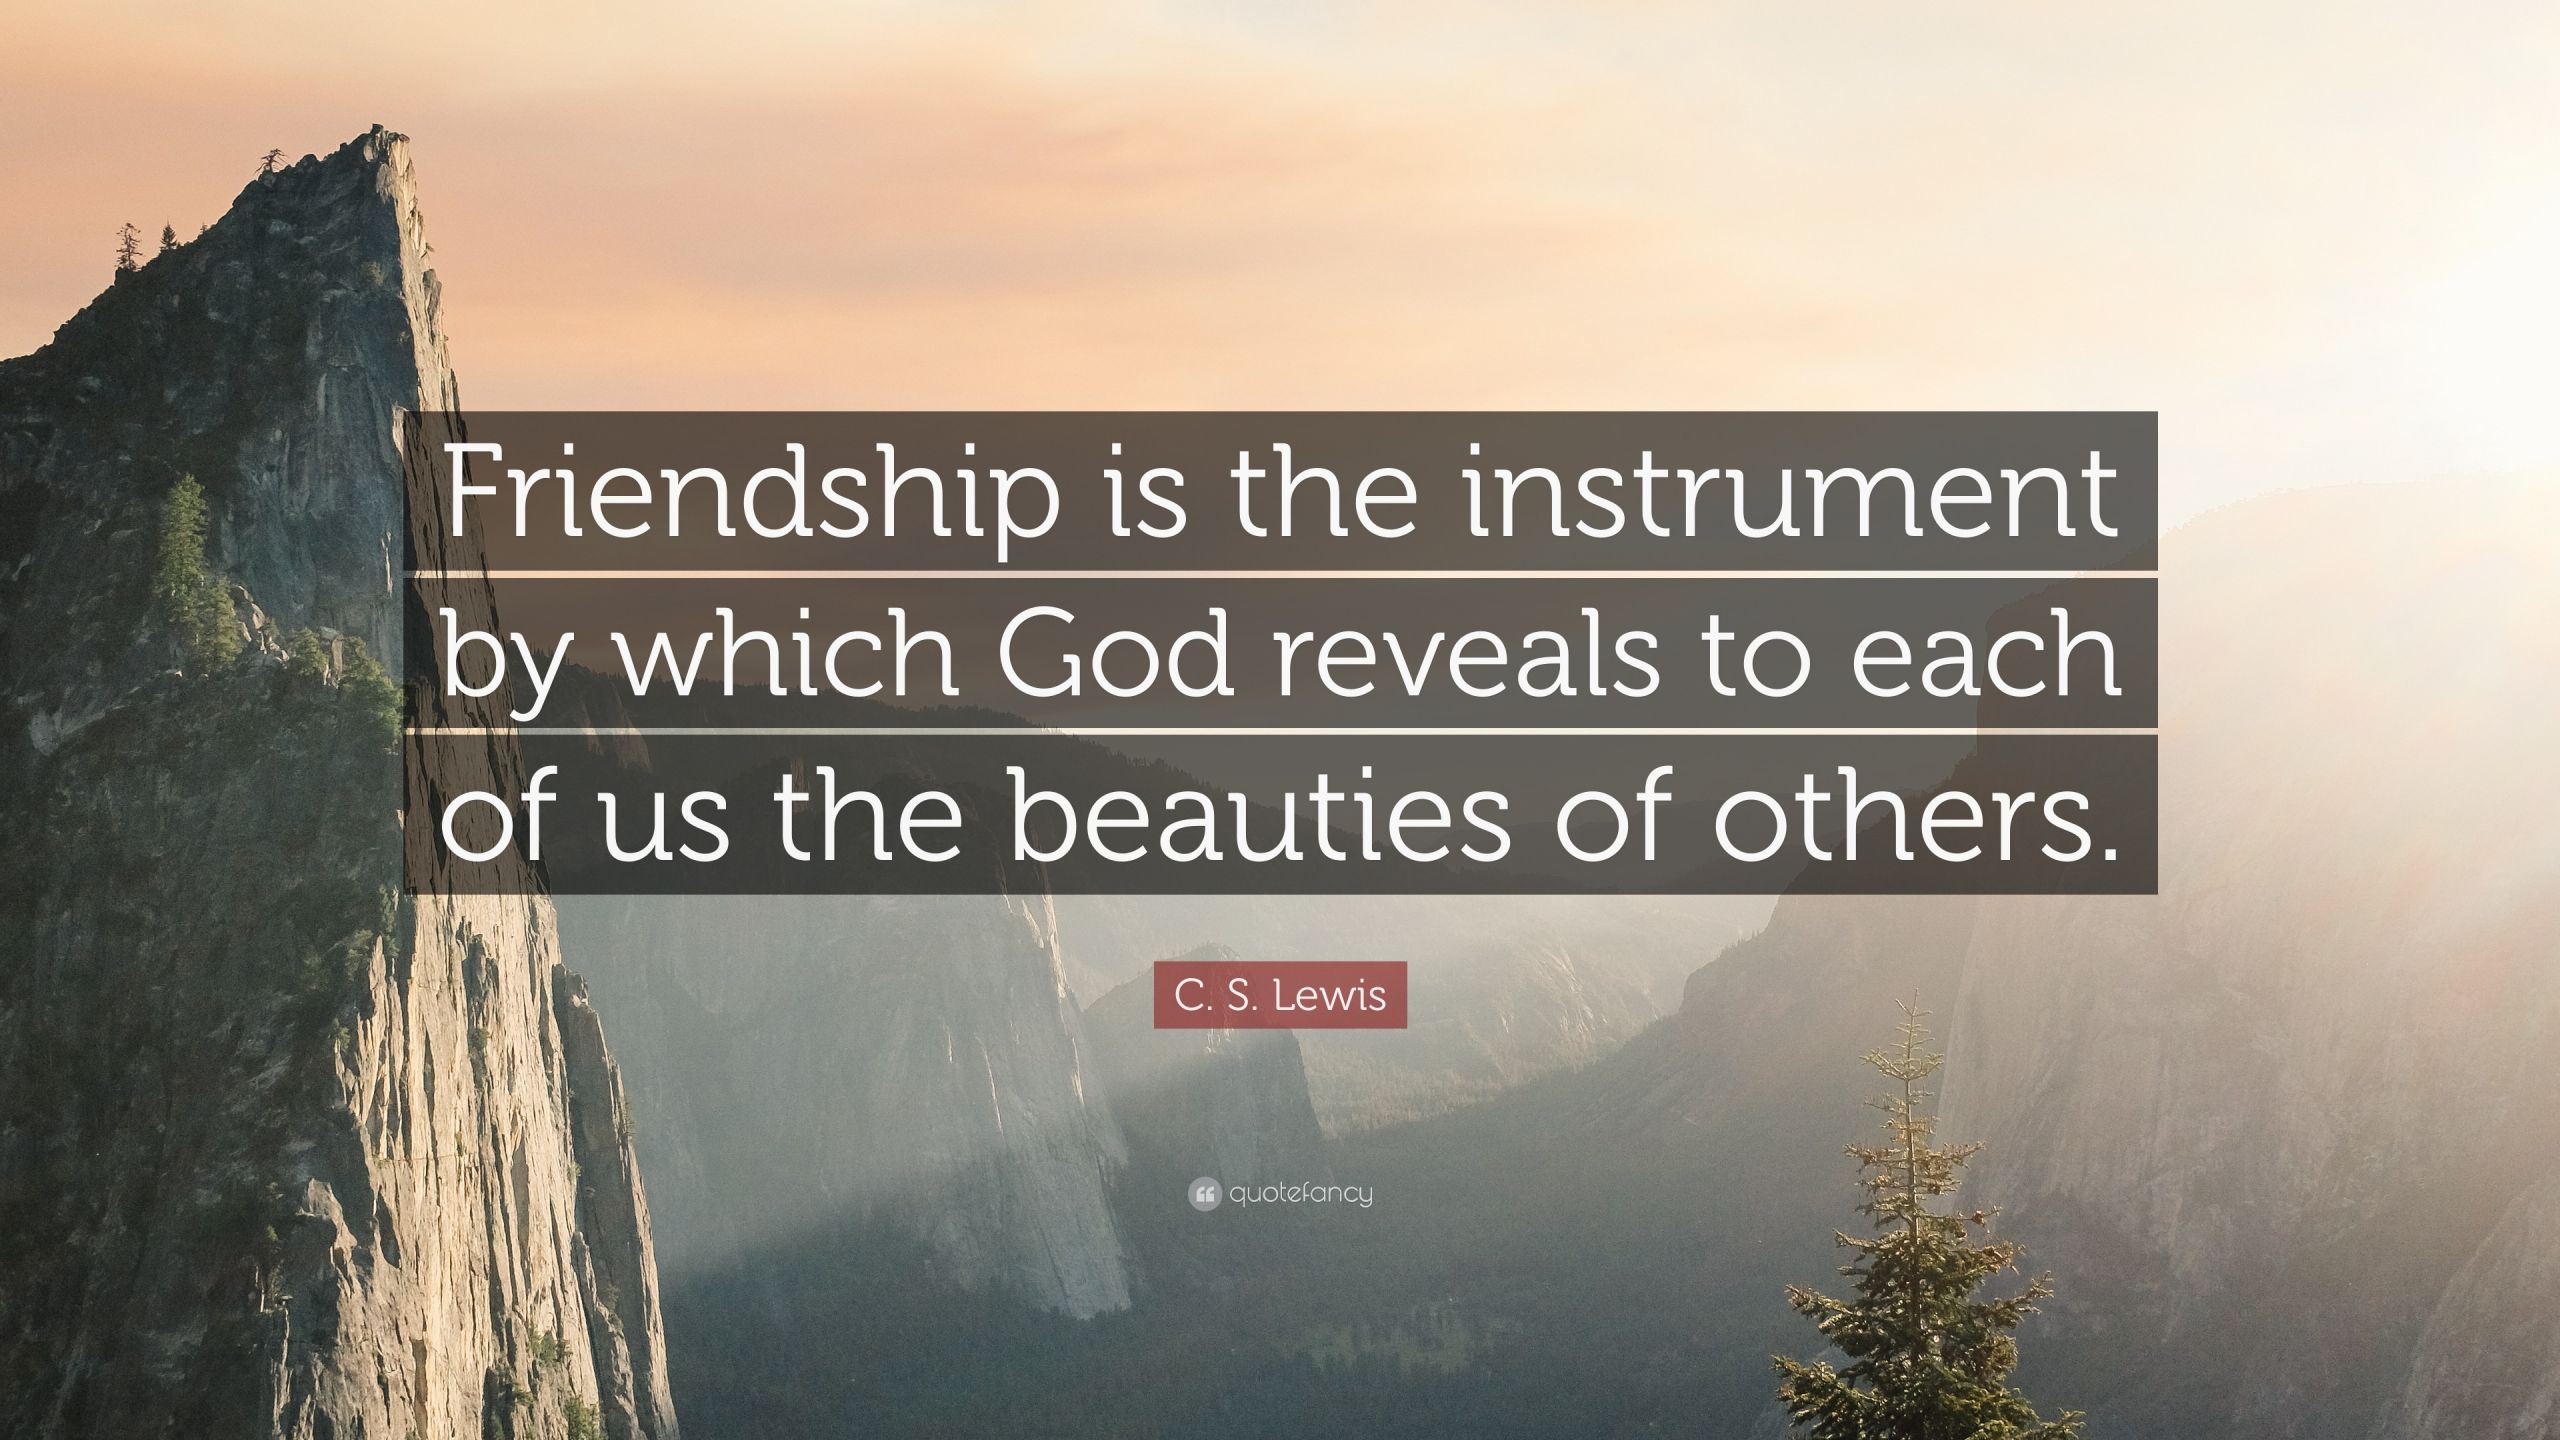 Cs Lewis Friendship Quotes
 C S Lewis Quote “Friendship is the instrument by which